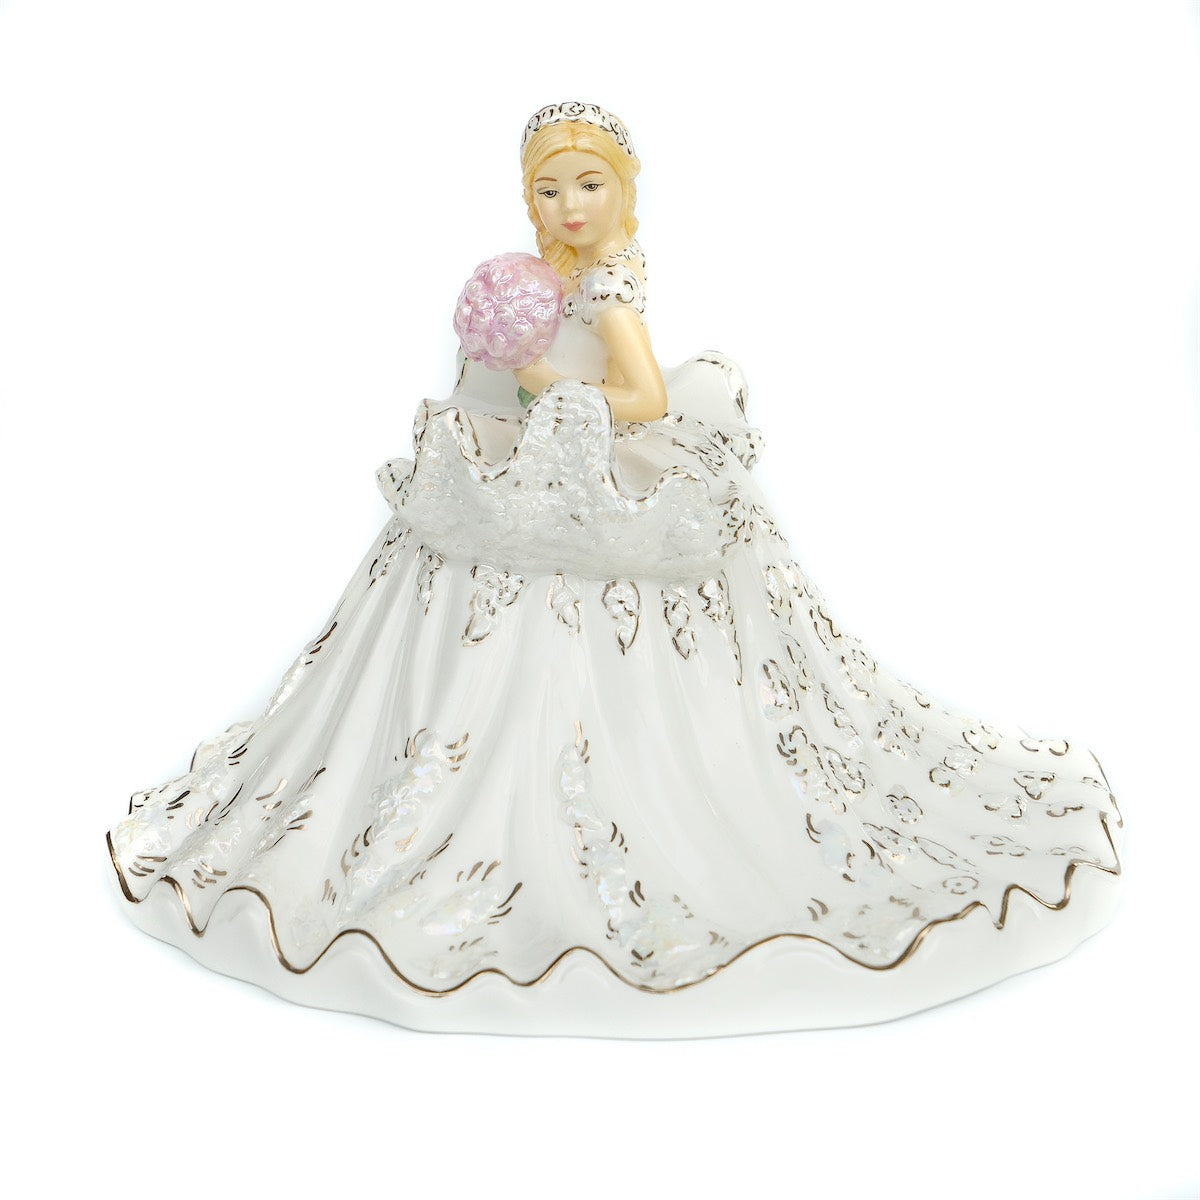 English Ladies Mini Gypsy Elegance Figurine Blonde  Thelma Madine’s striking Gypsy Elengence figurine has been miniaturised in these cute little mini bride figures. Hand made and hand-decorated, each figure shines with real platinum and Mother of pearl lustre. Gift boxed.